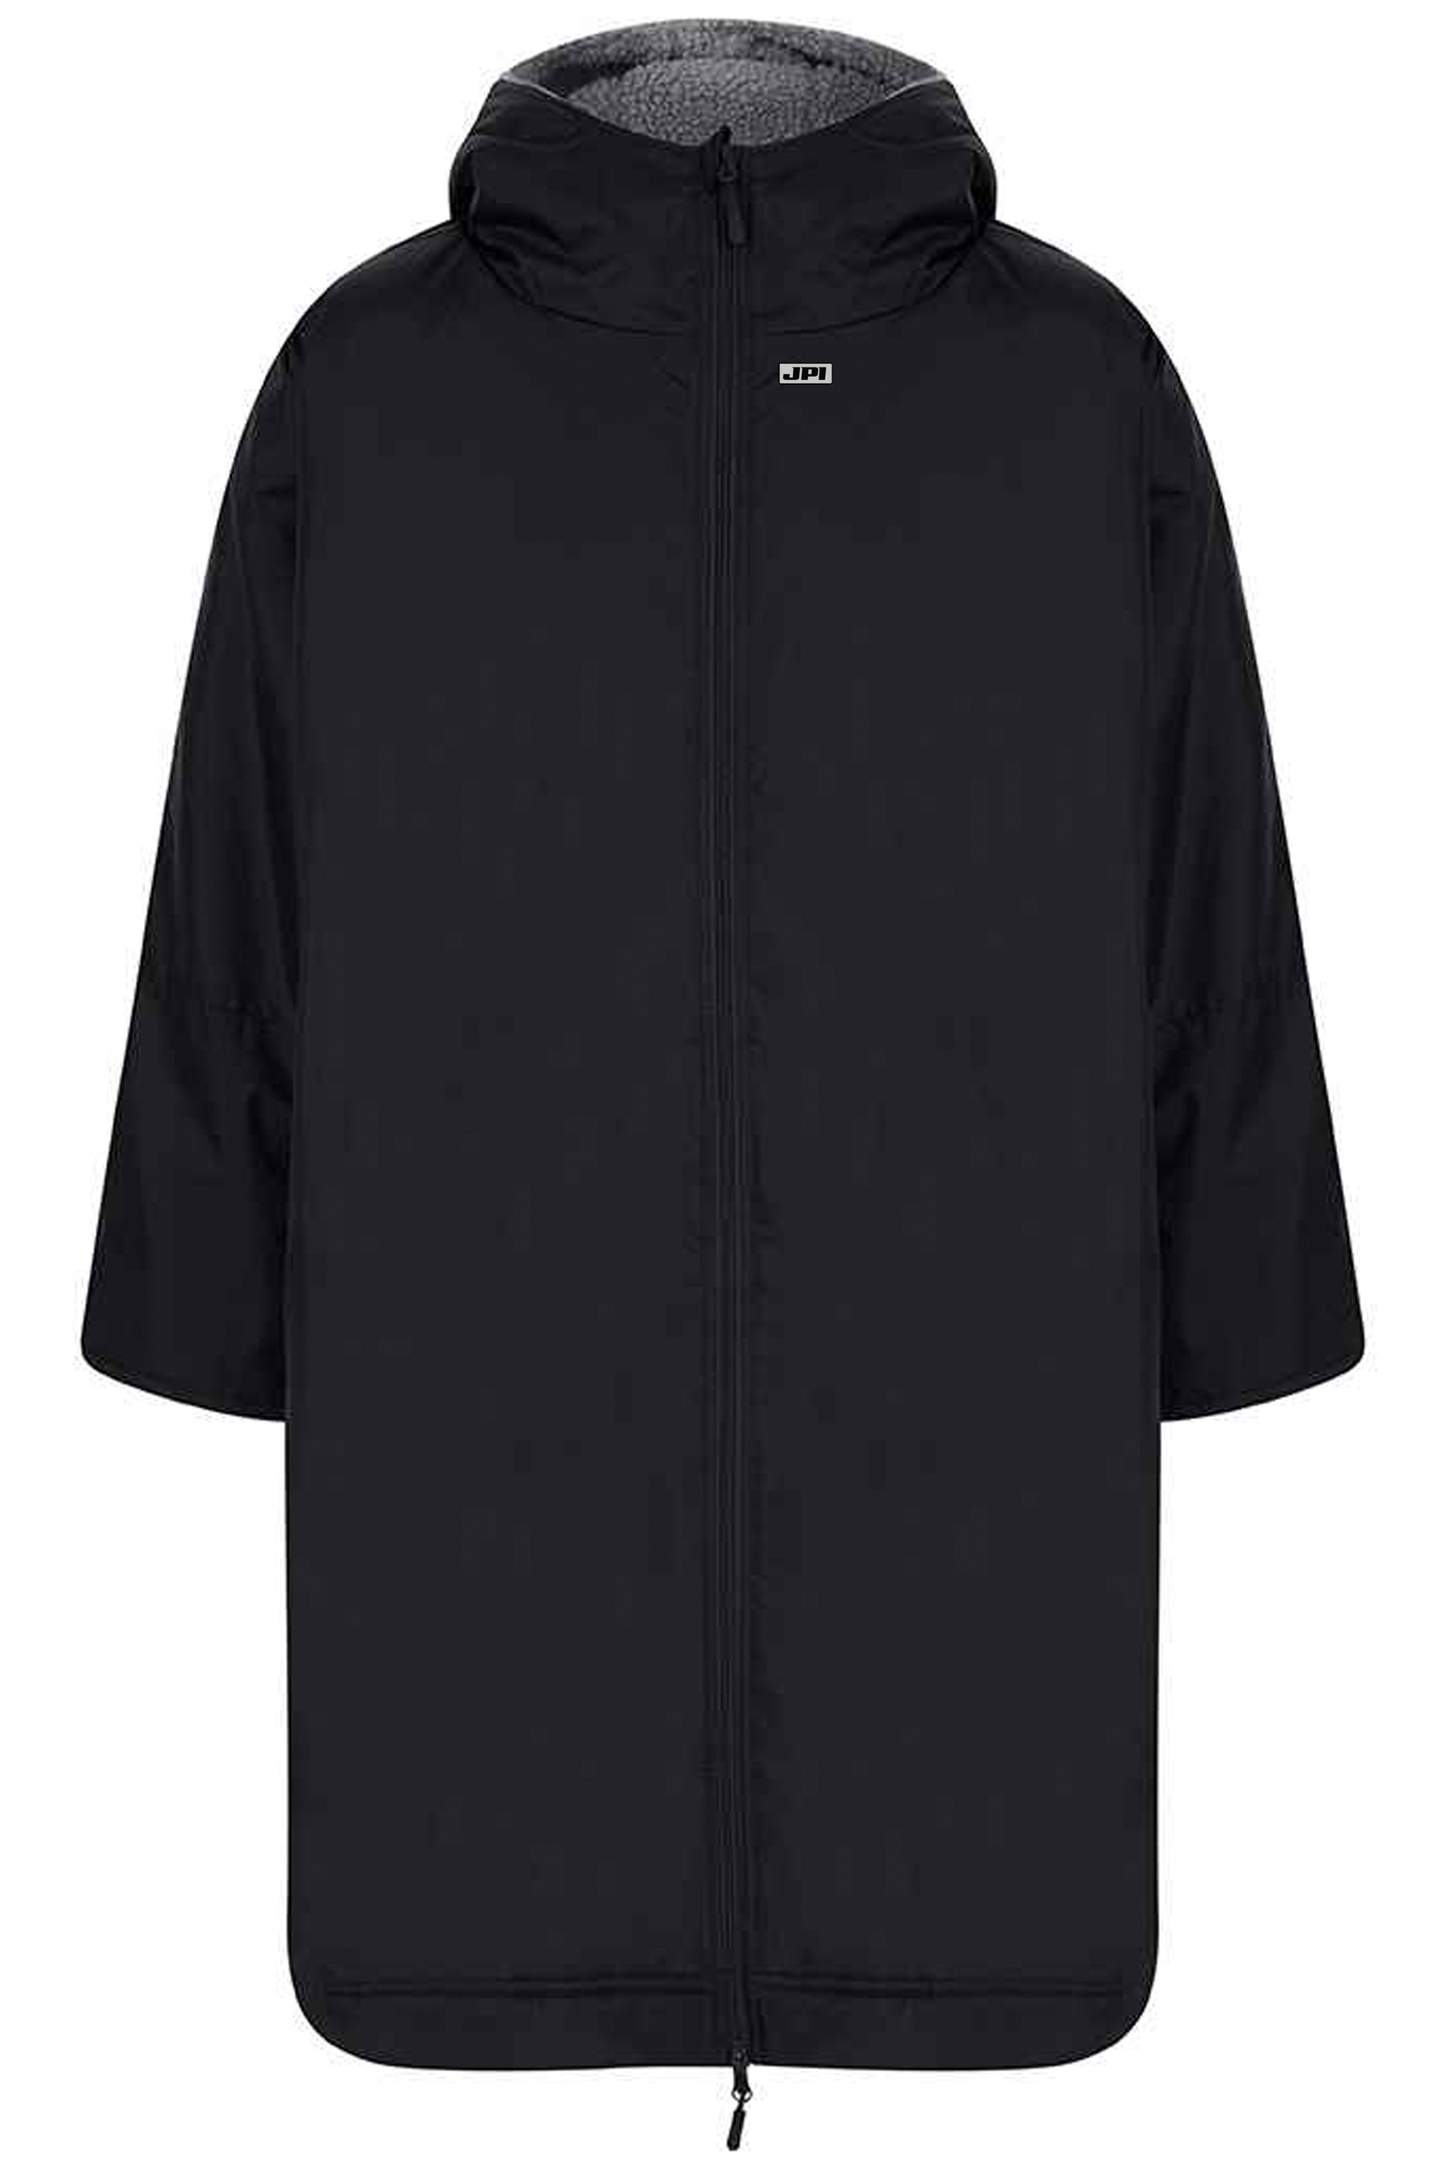 JPI Robe. All weather robe, teddy fleece lining, waterproof and windproof. Picture shows black robe.